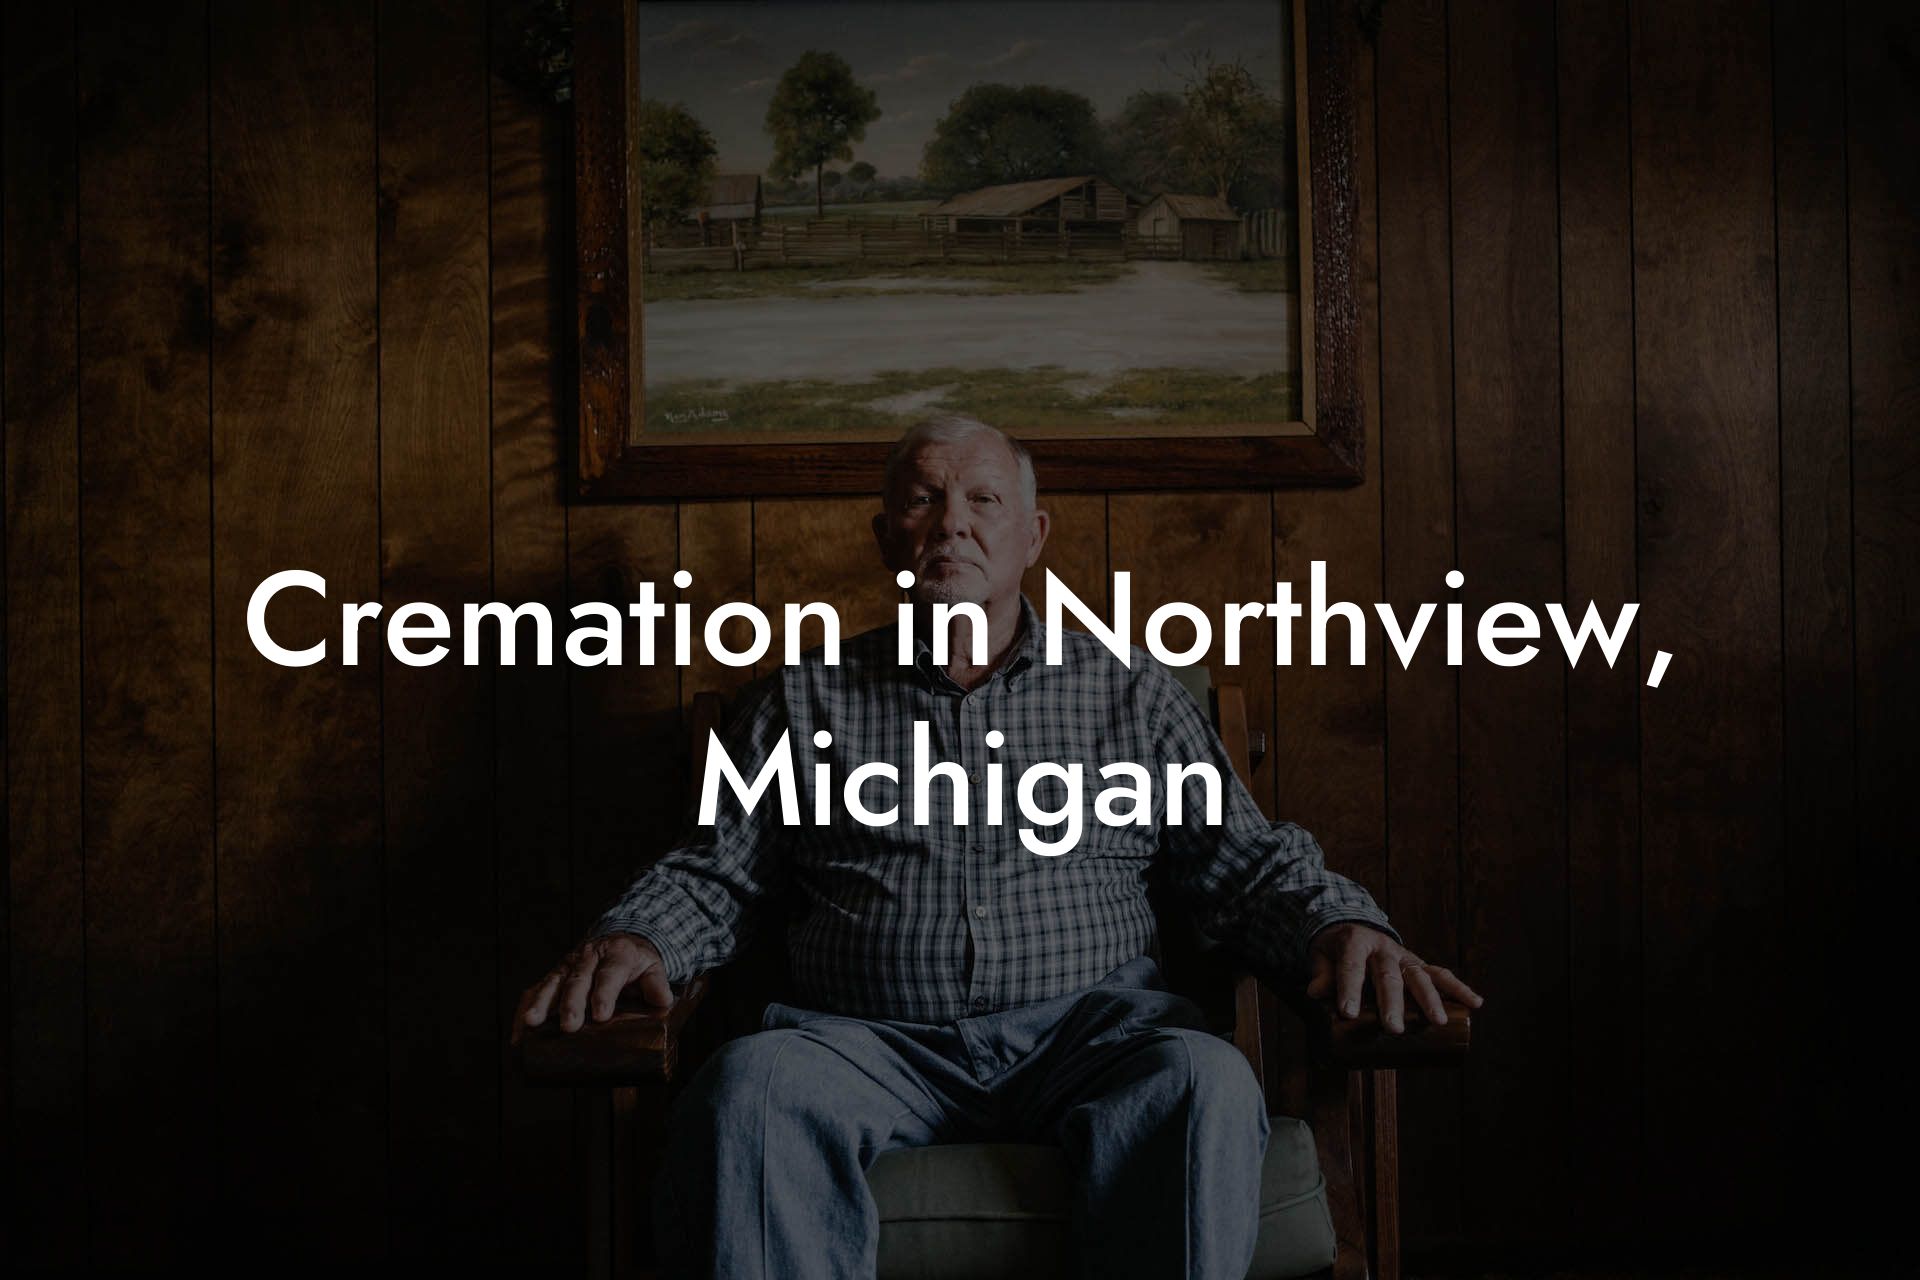 Cremation in Northview, Michigan